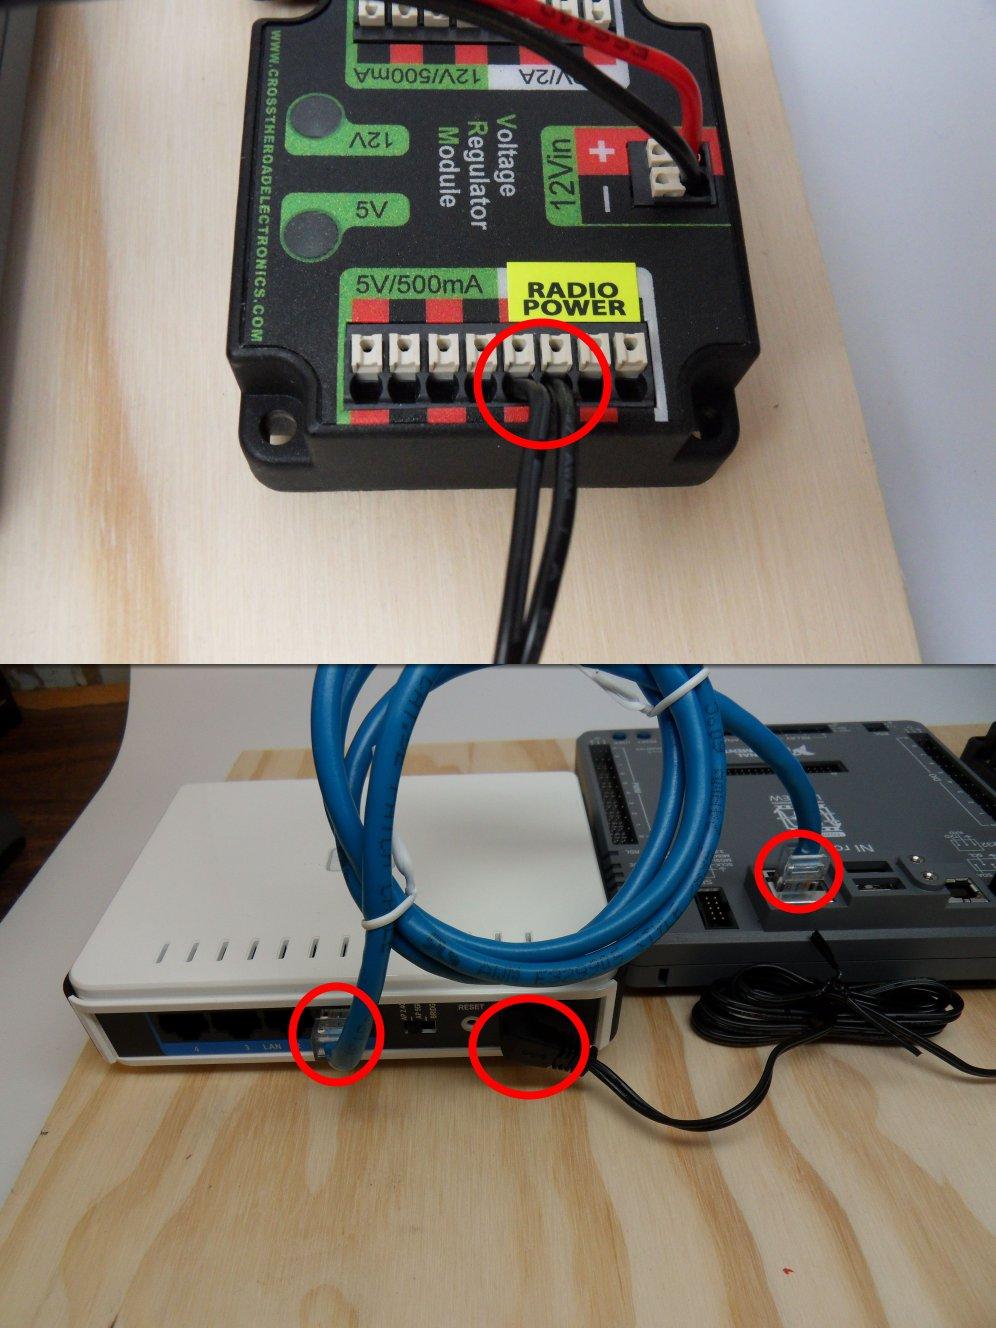 Radio Power and Ethernet Requires: Wire stripper, small flat screwdriver (optional), DAP1522 power supply, DAP 1522 Ethernet cable 1.